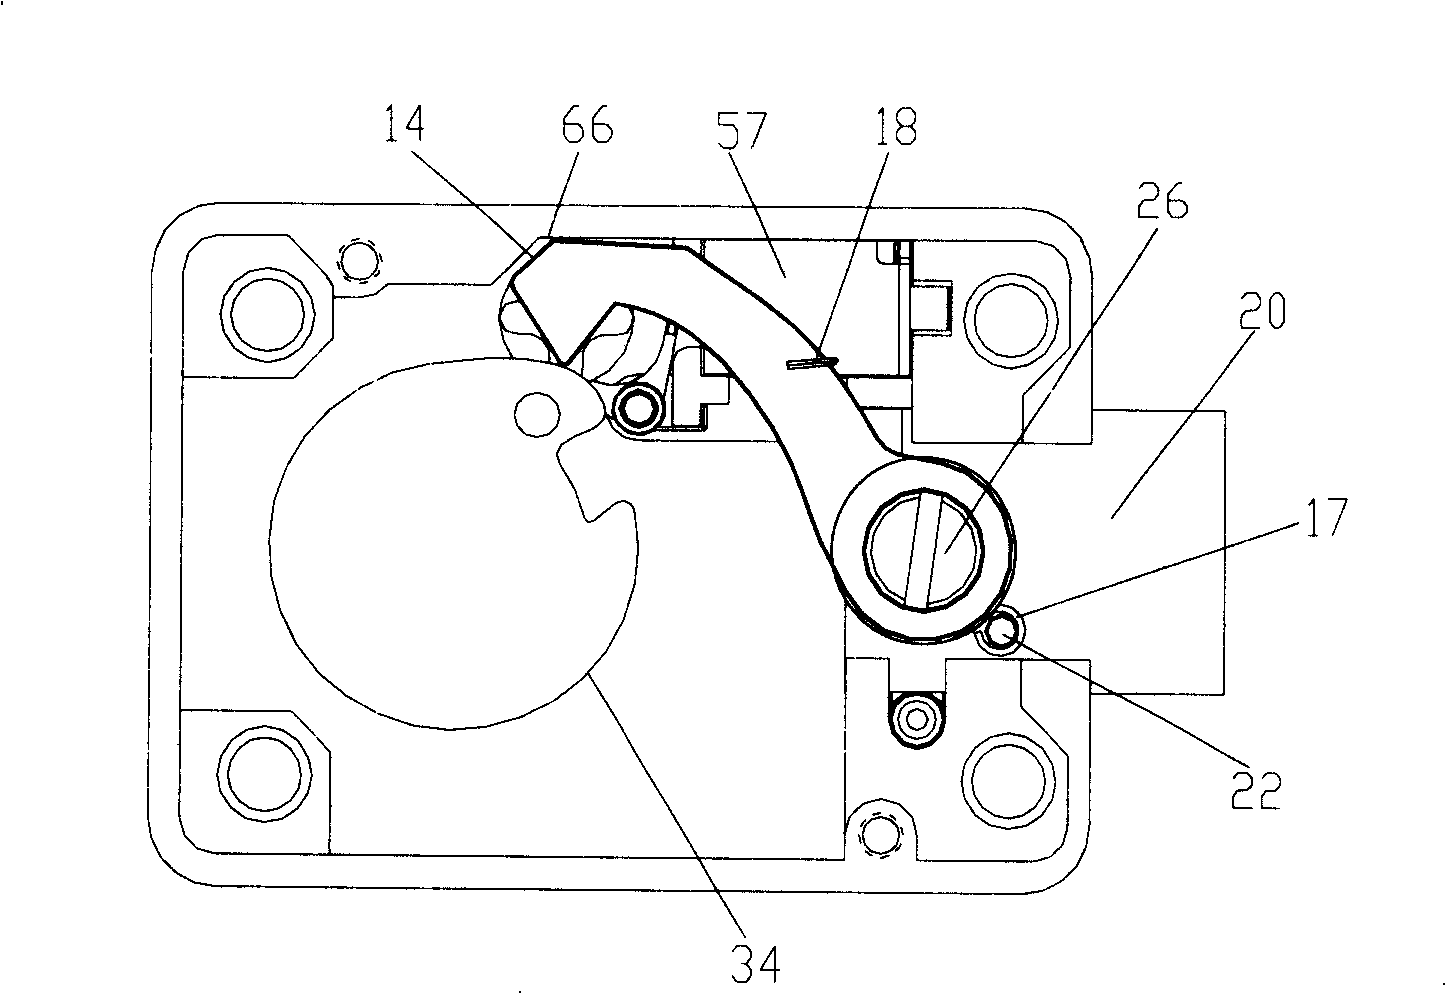 Puzzle lock and its mechanism